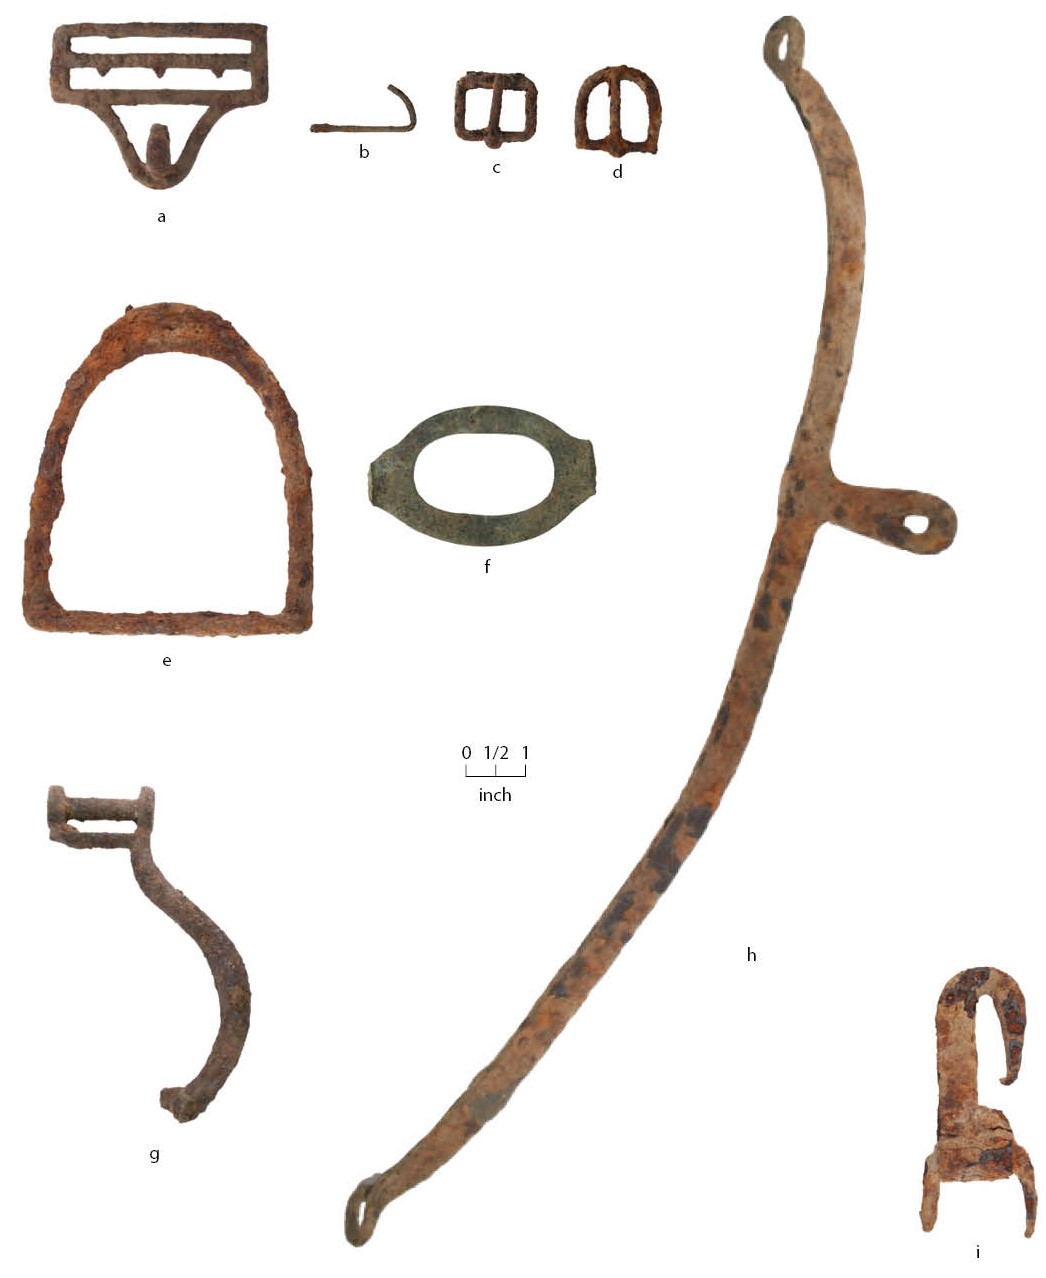 Rusted metal pieces of horse tack on a white backgrougnd with a scale bar.